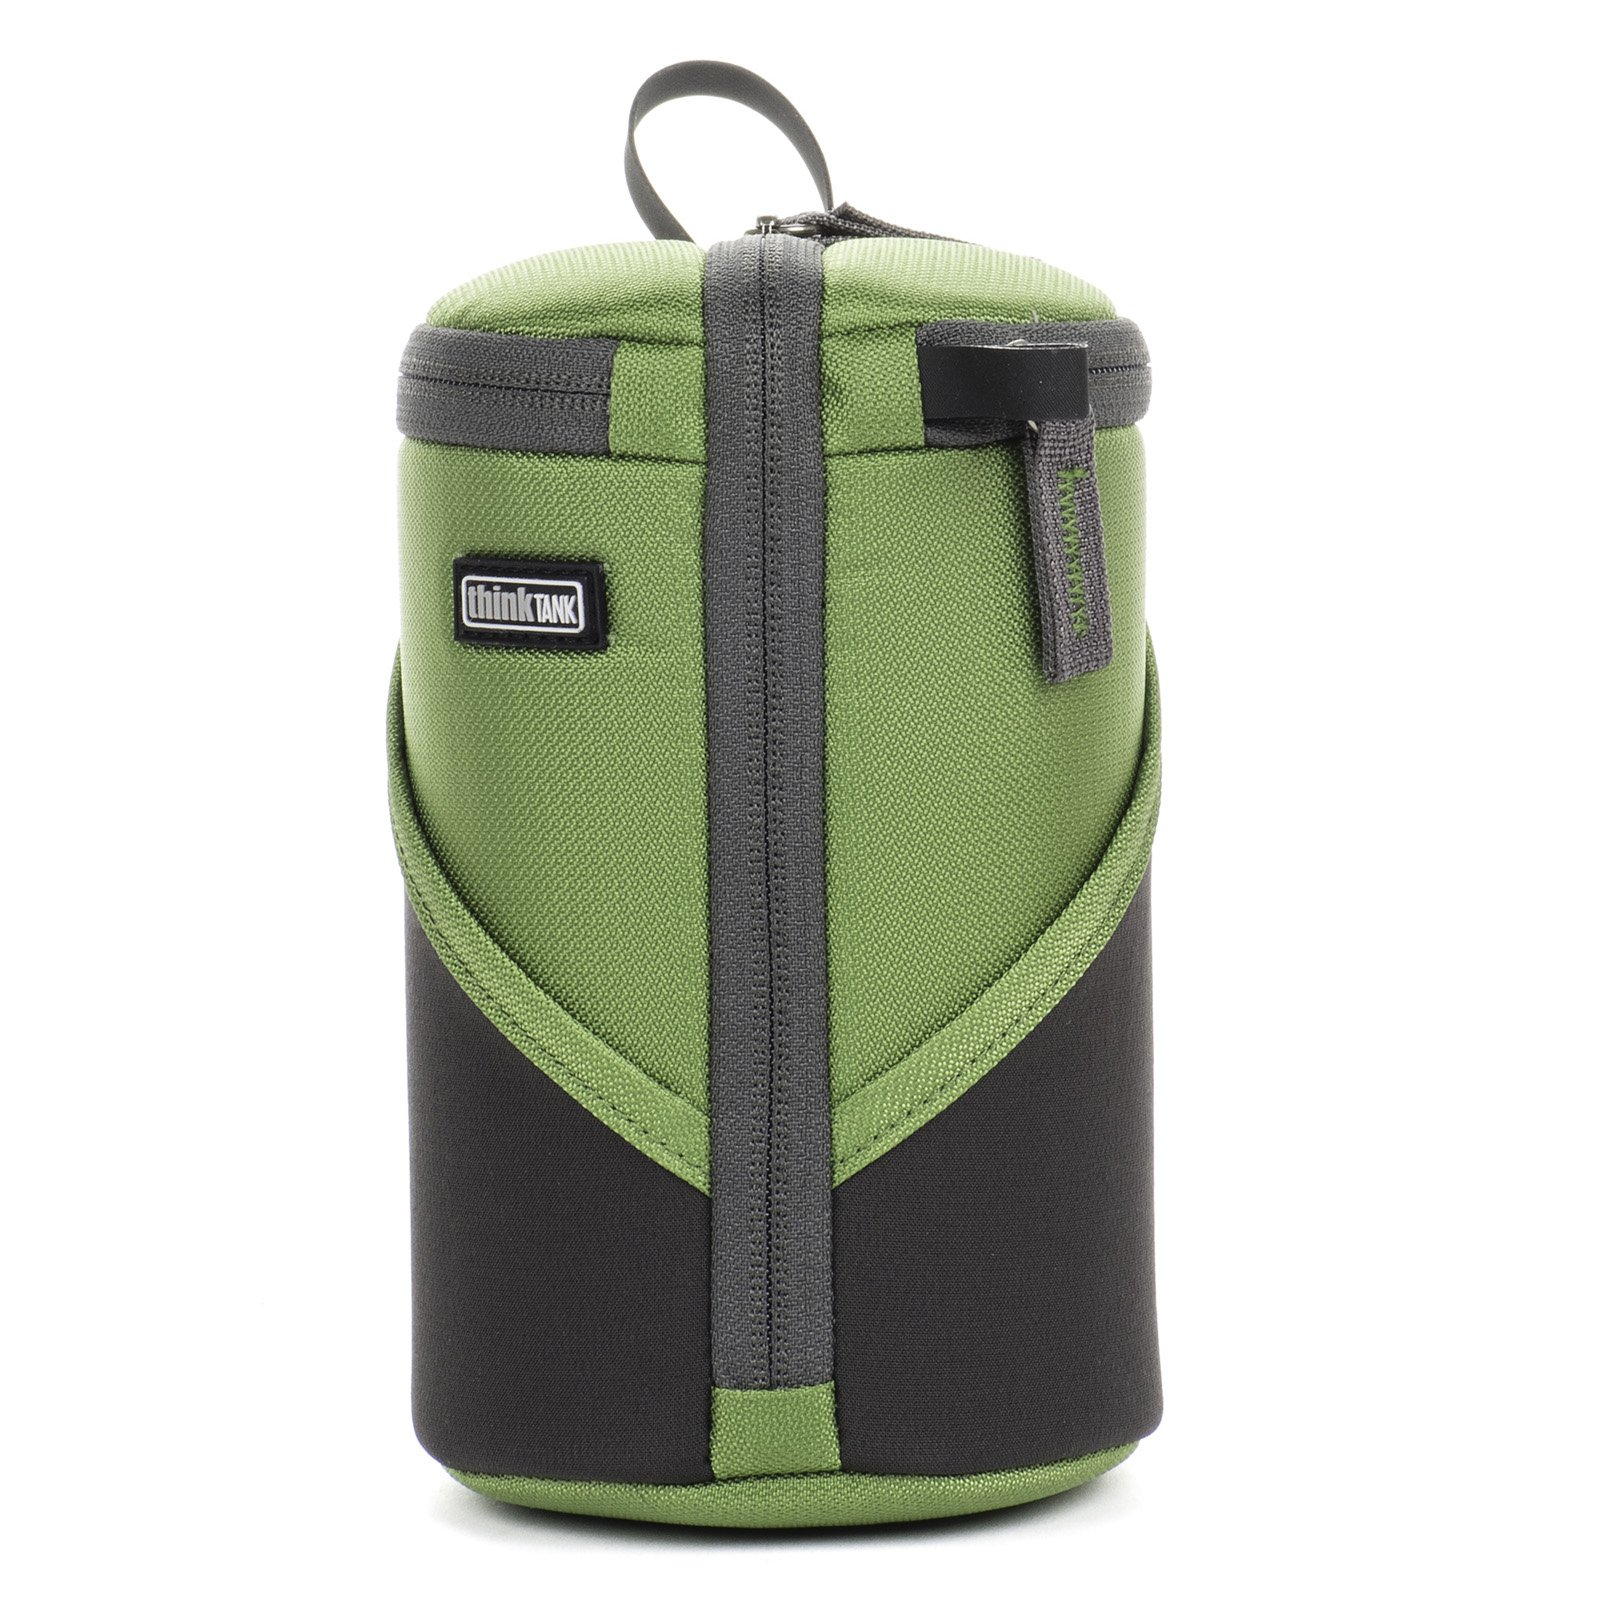 THINK TANK LENS CASE DUO 15 GREEN